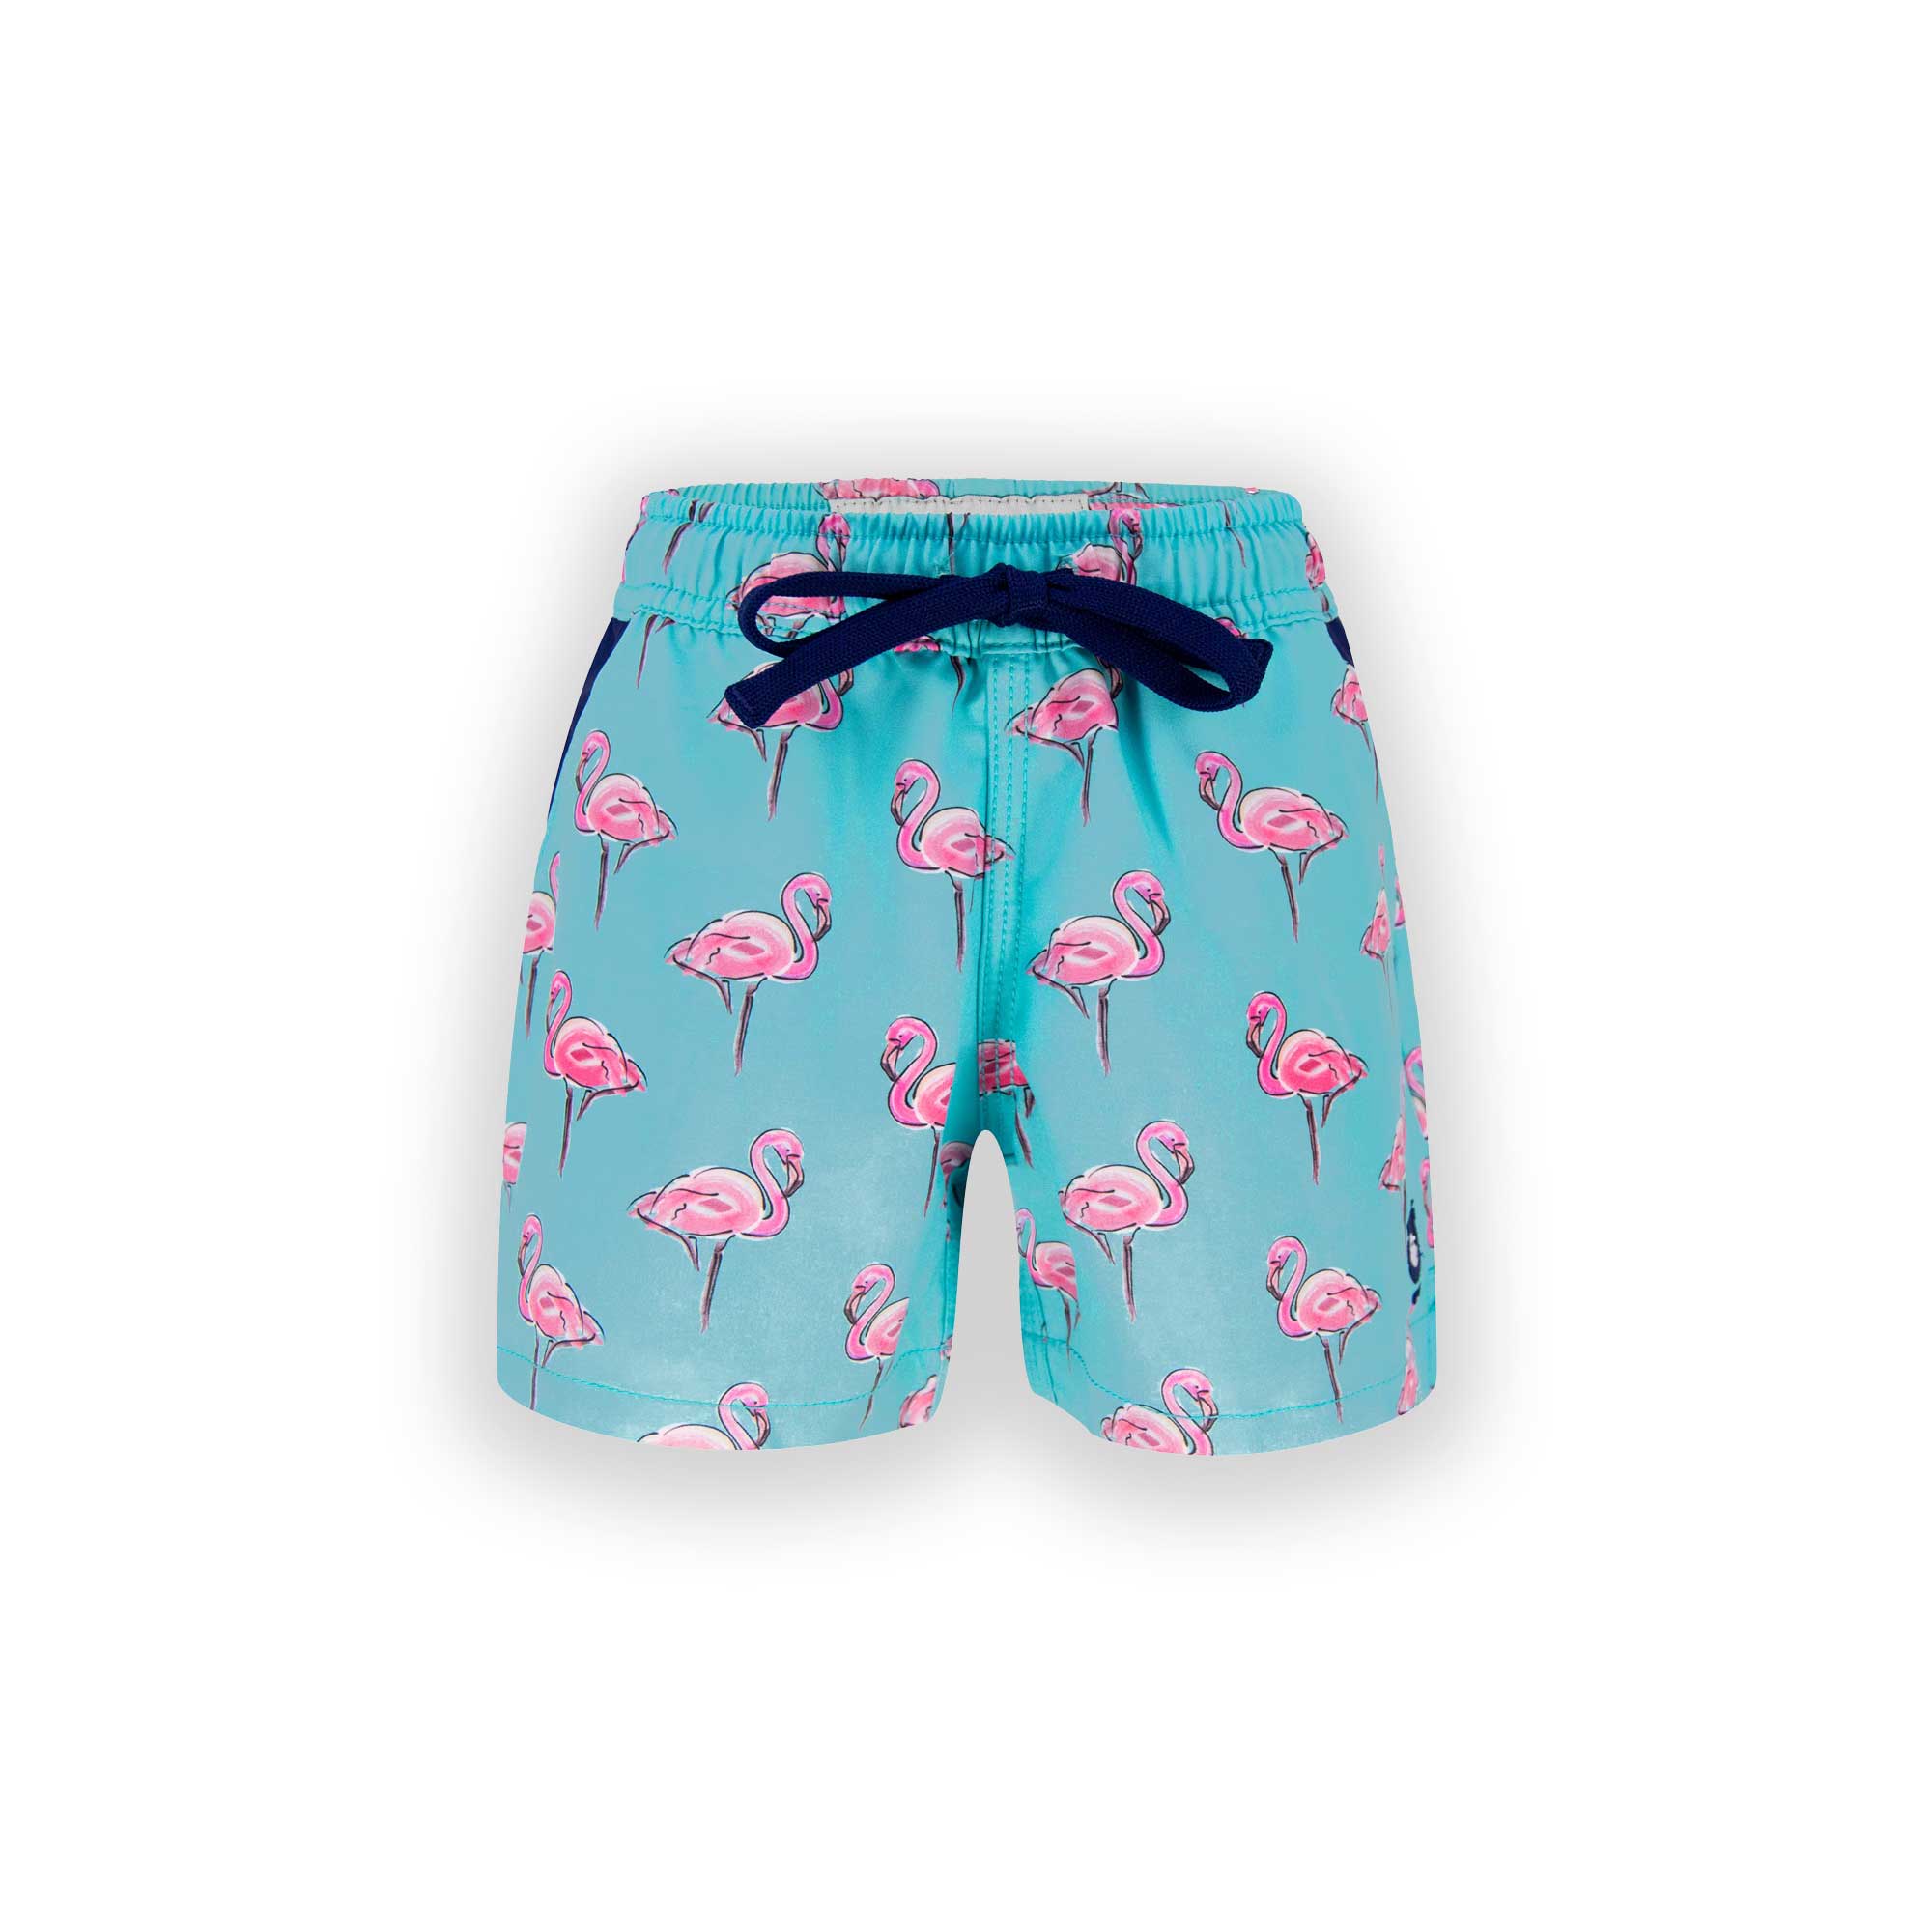 Matching Father & Son Flamingo Swim Shorts with Waterproof Pocket